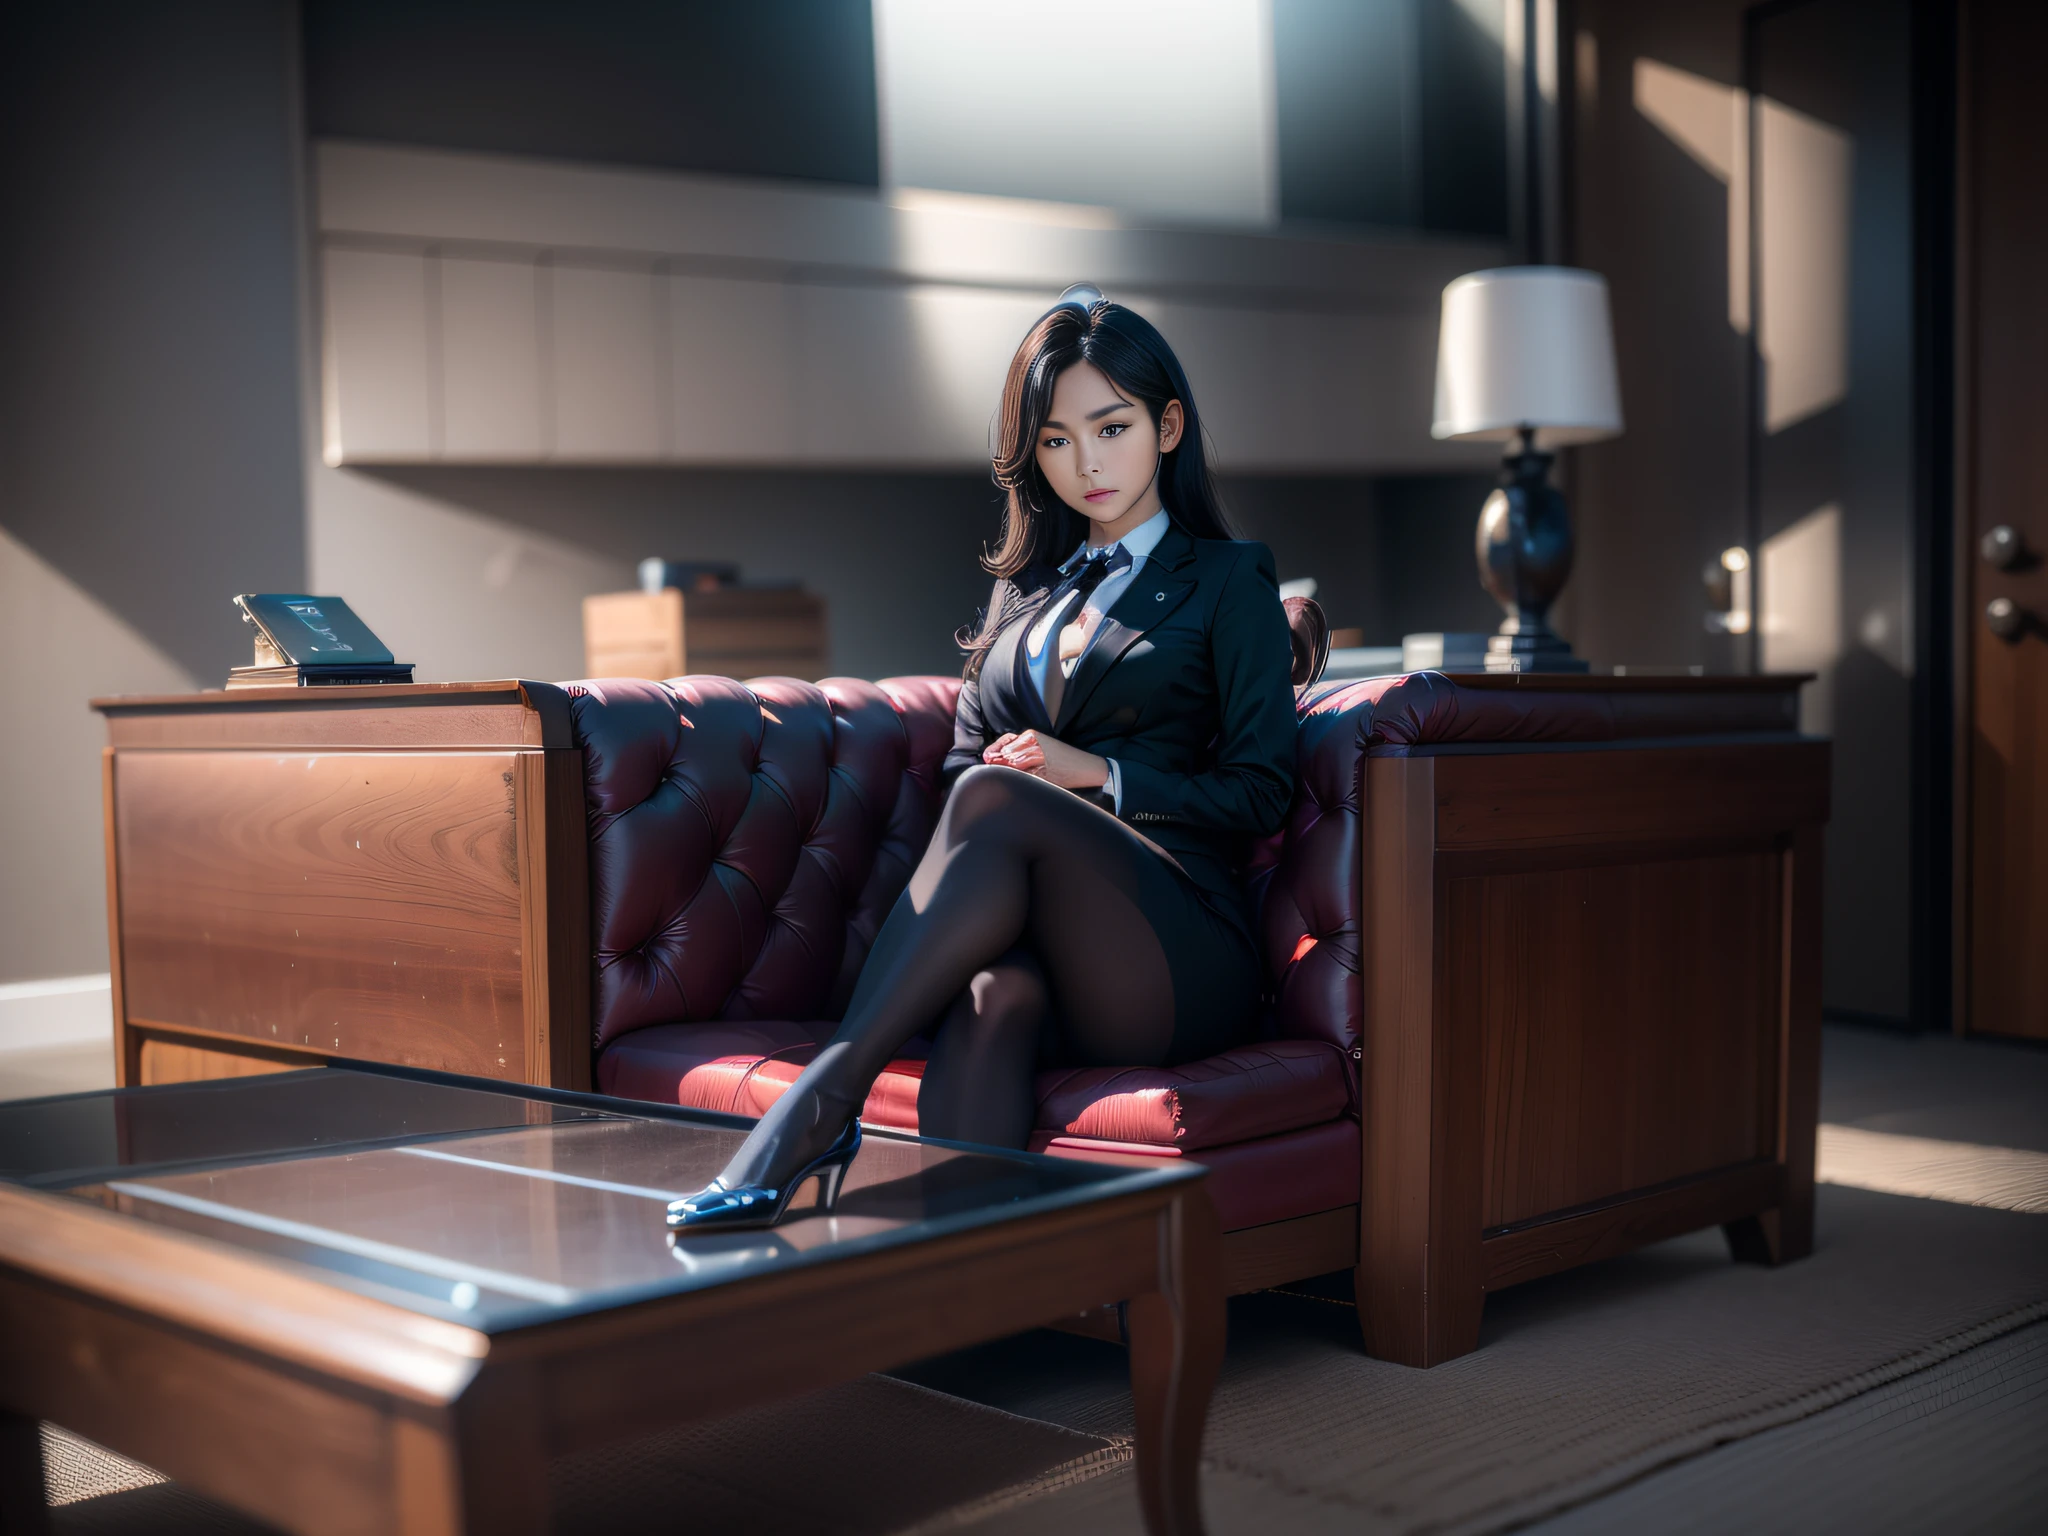 An American woman, seated, dressed, elite, velvet, dark violet color, small tie. Seria, boss, imposing, Full HD, ISO, The law firm features contemporary design furniture, including armchairs upholstered in black and gray leather, tempered glass coffee tables with chrome bases, a solid wood meeting table with black leather chairs, and a built-in bookcase with brown leather bound legal books. ?" Its 11-blade circular diaphragm and XA lens elements together provide a nice bokeh. In addition, the lens is equipped with an aperture ring that can be toggled between clicked and clickless operation, a dust and moisture resistant design, and four XD linear autofocus motors that offer fast and accurate autofocus and tracking. This lens offers Sony photographers a brilliant performance tool for portraiture, night scenes, and photography in general."